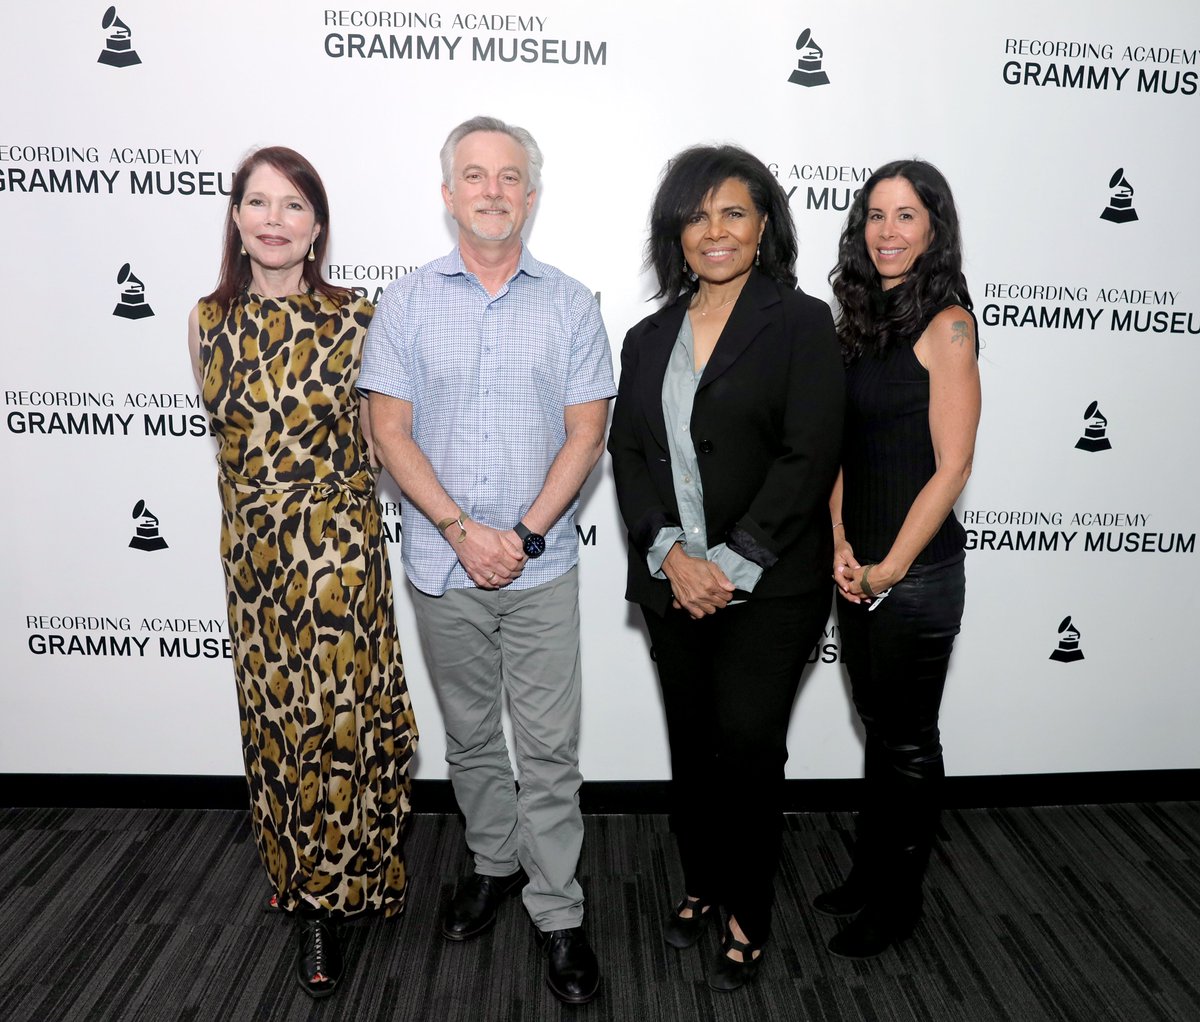 @sharonrobinsong, Directors Dayna Goldfine and Dan Geller, and @PamelaChelin at Monday's Reel to Reel screening of HALLELUJAH: LEONARD COHEN, A JOURNEY, A SONG at the @GRAMMYMuseum. 

📷 Courtesy of the Recording Academy™️/photo by Rebecca Sapp.